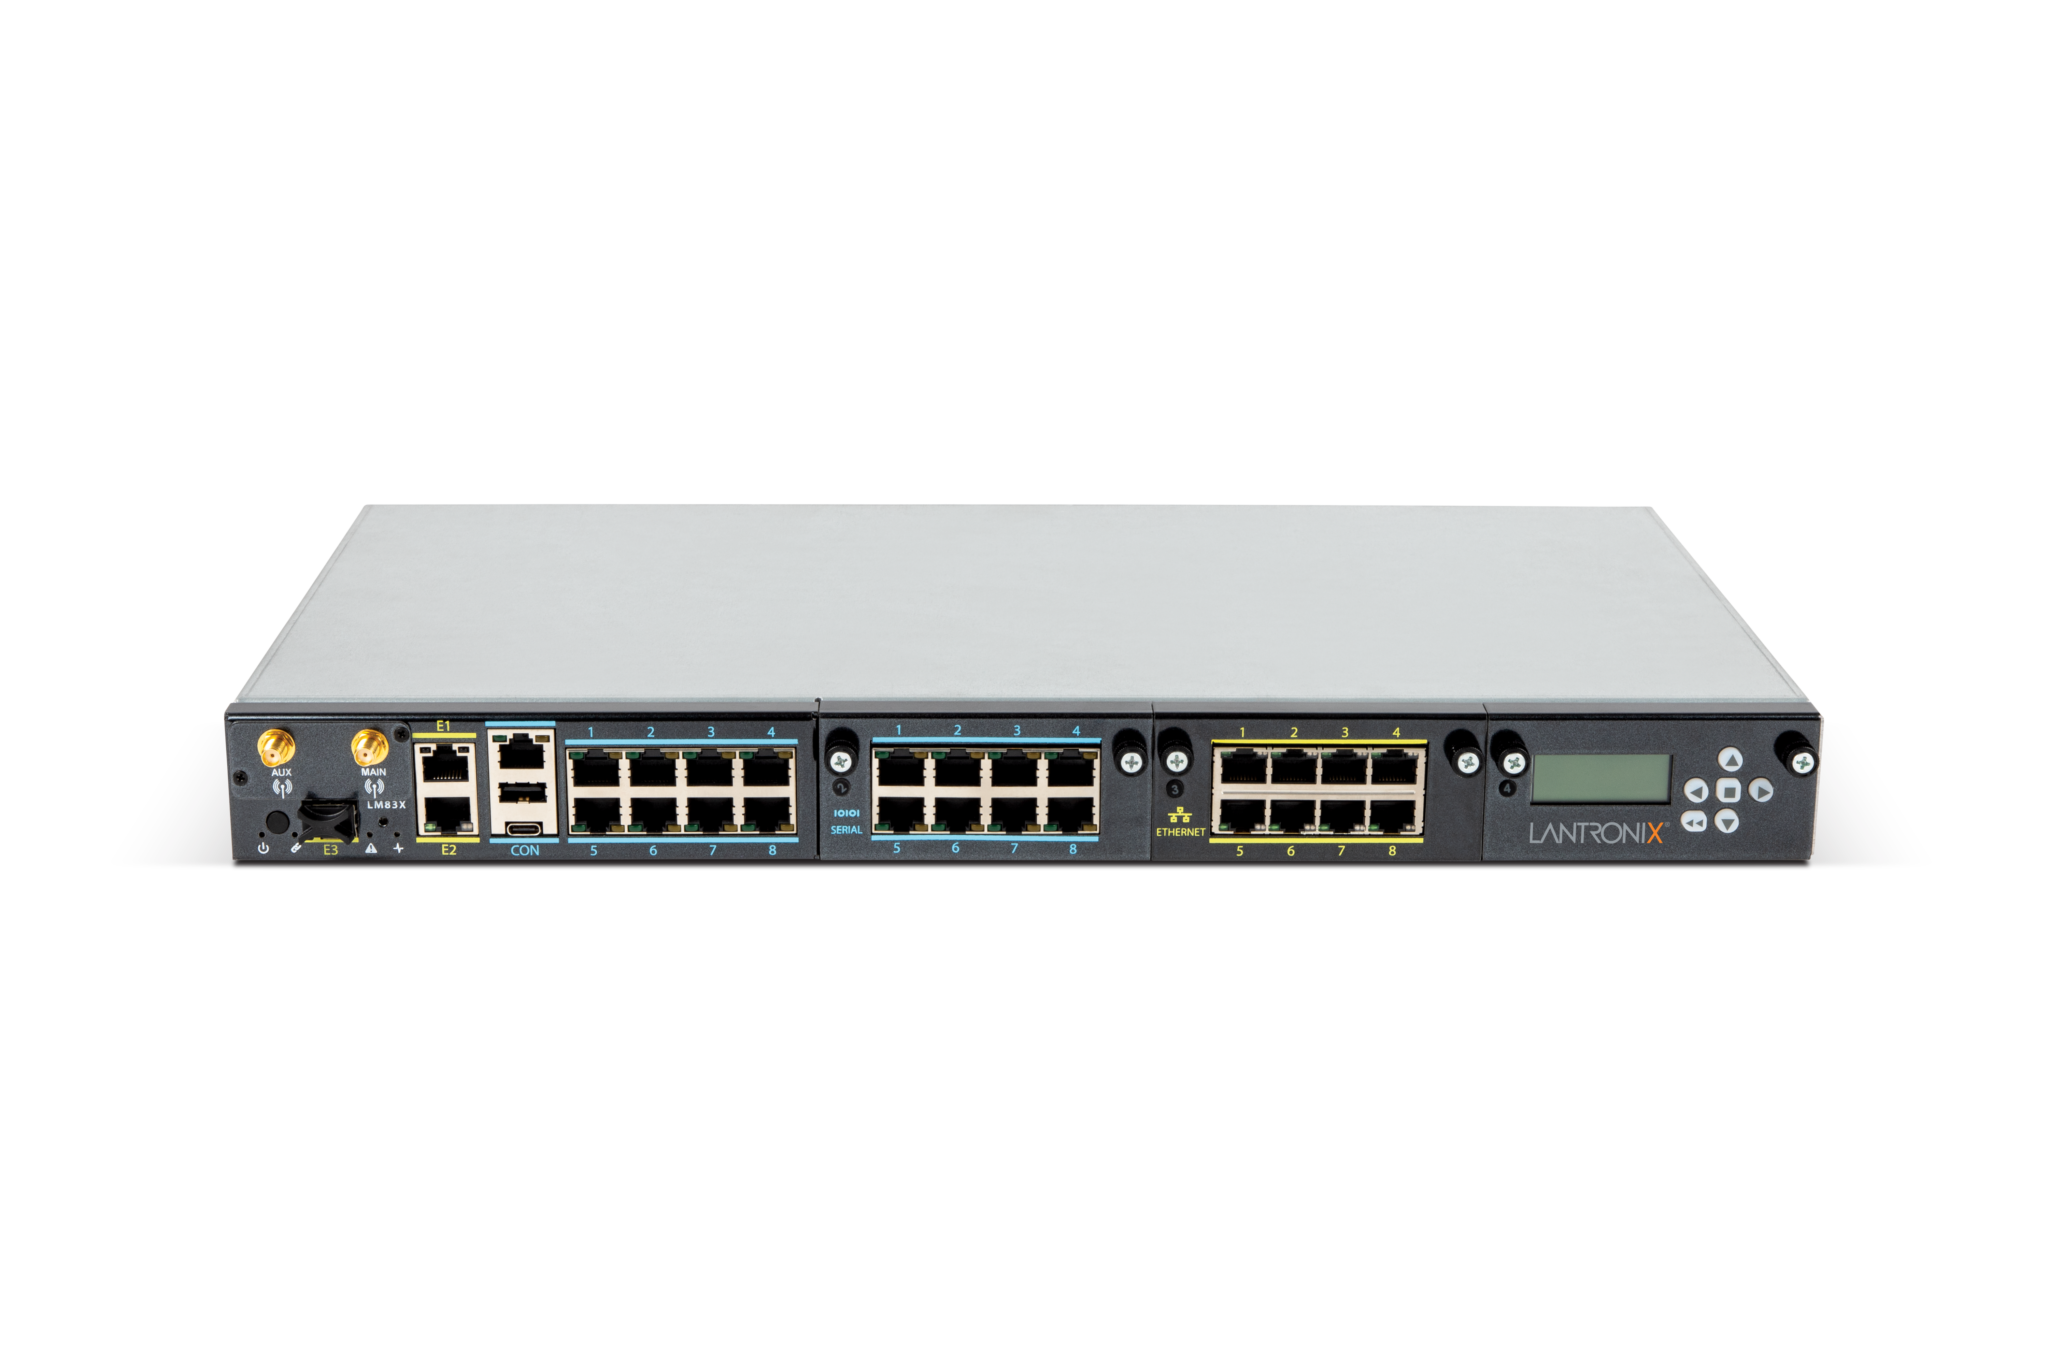 Lantronix LM83X Advanced Console Server product for sale, cover image